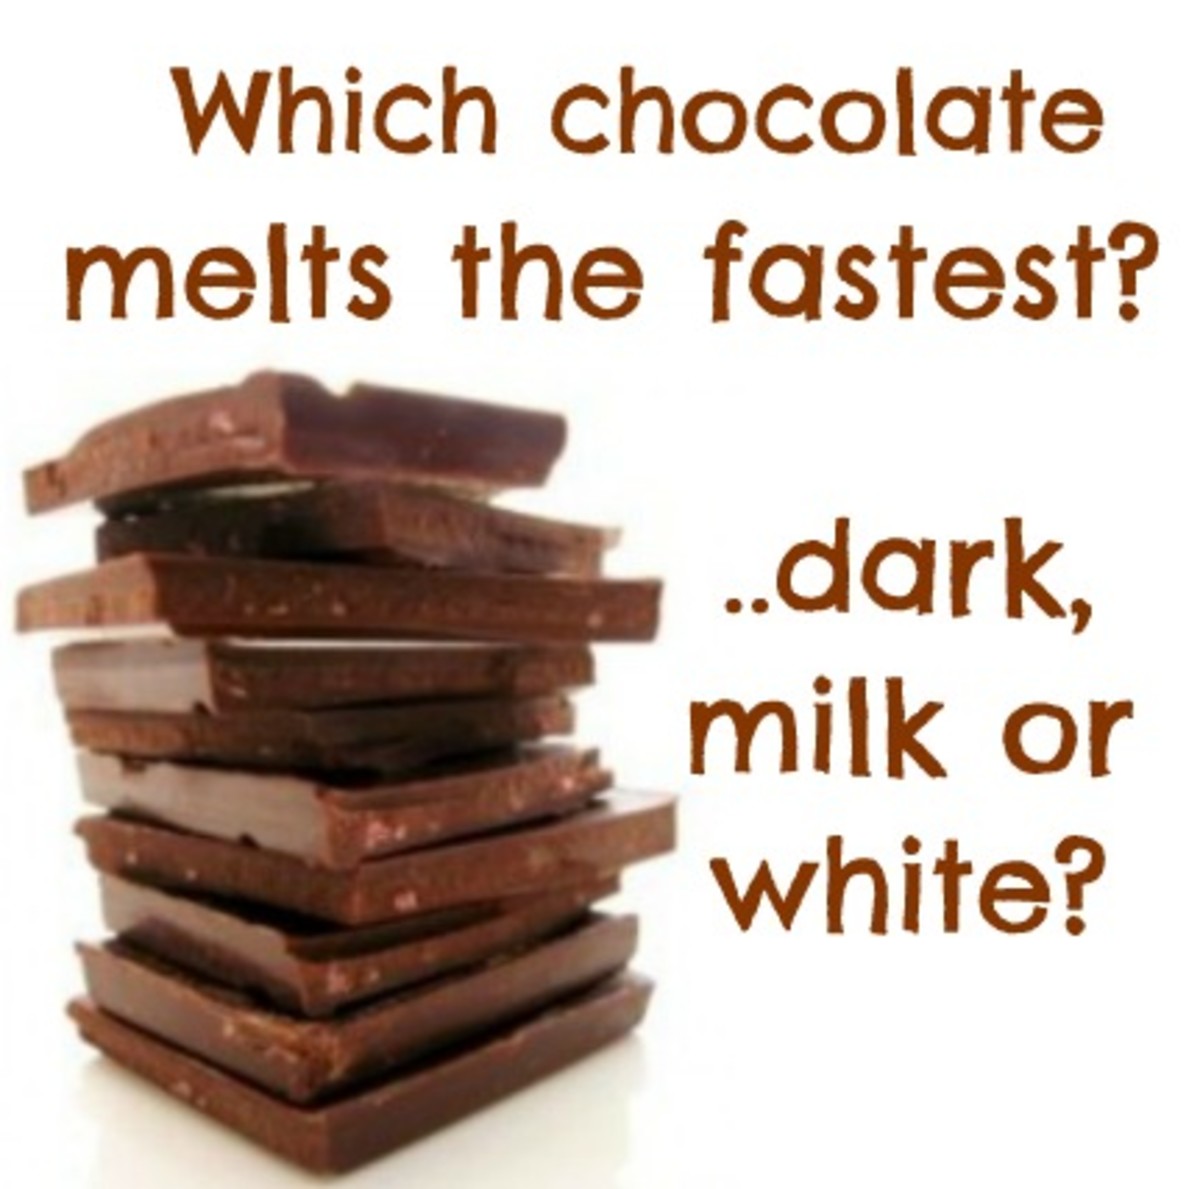 Which chocolate melts the fastest?